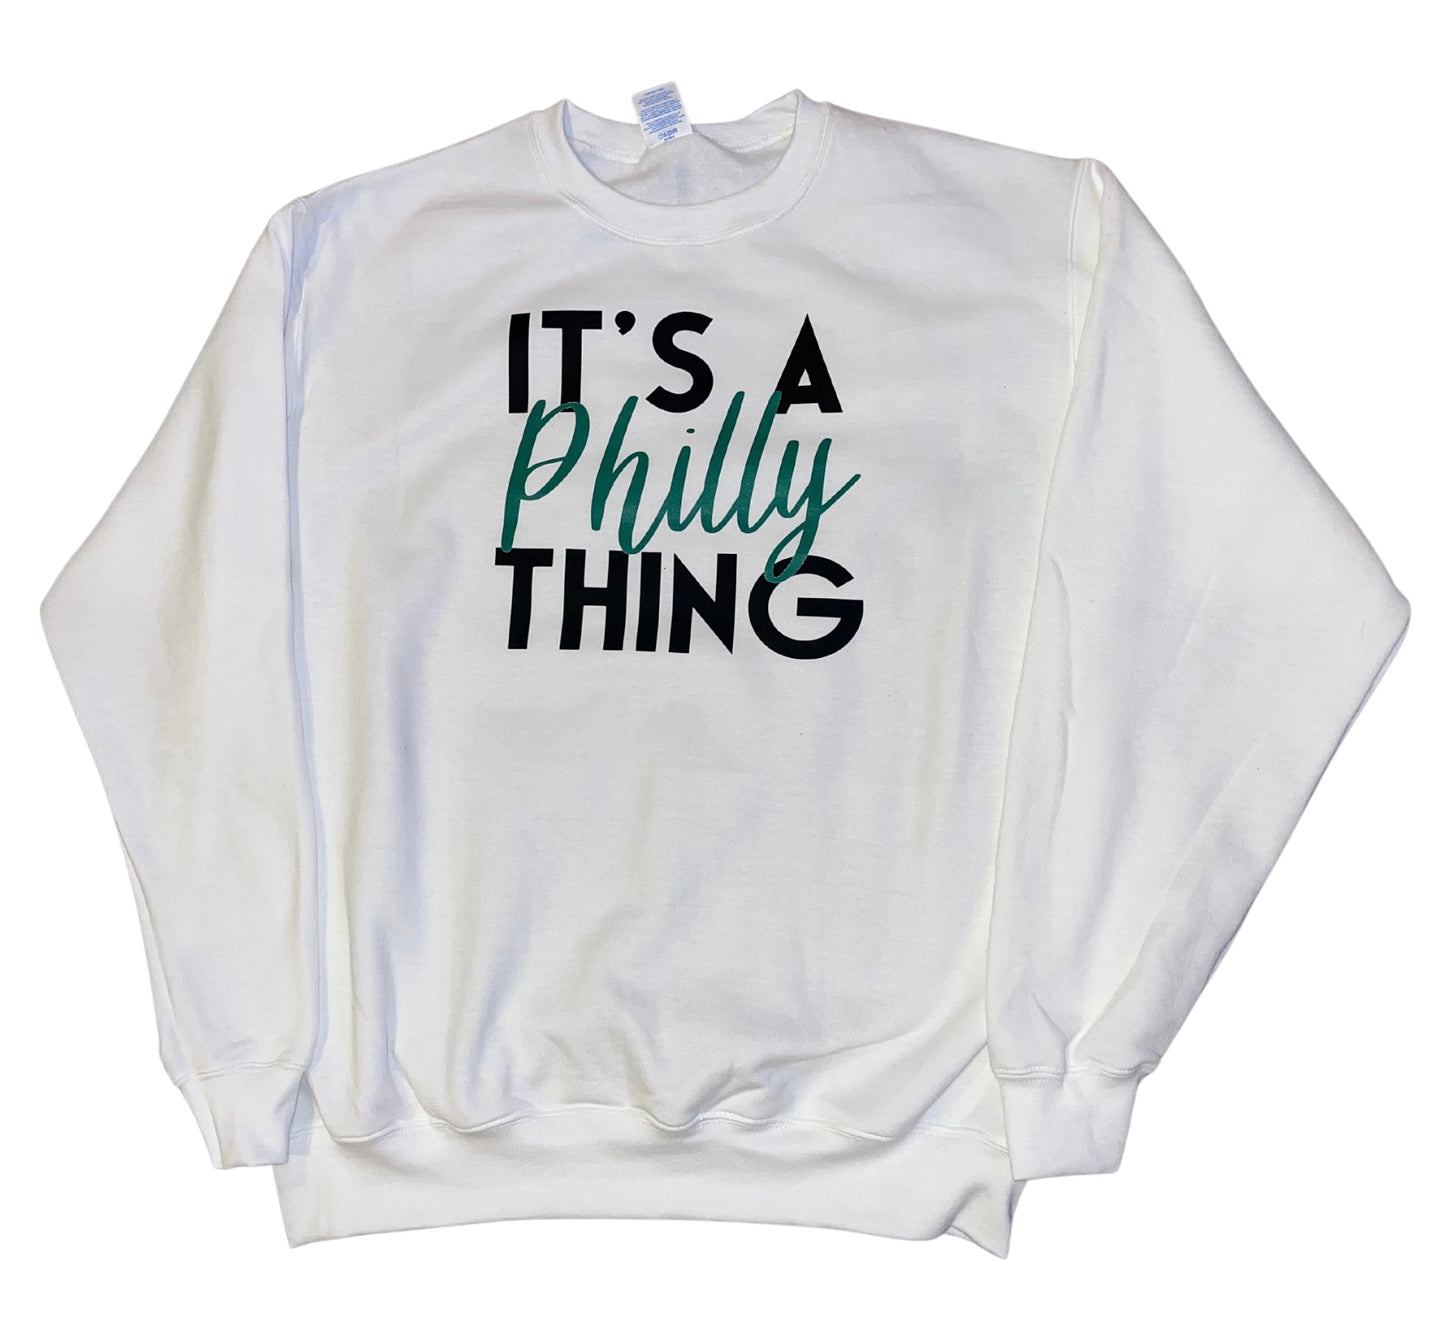 It’s a Philly Thing- white